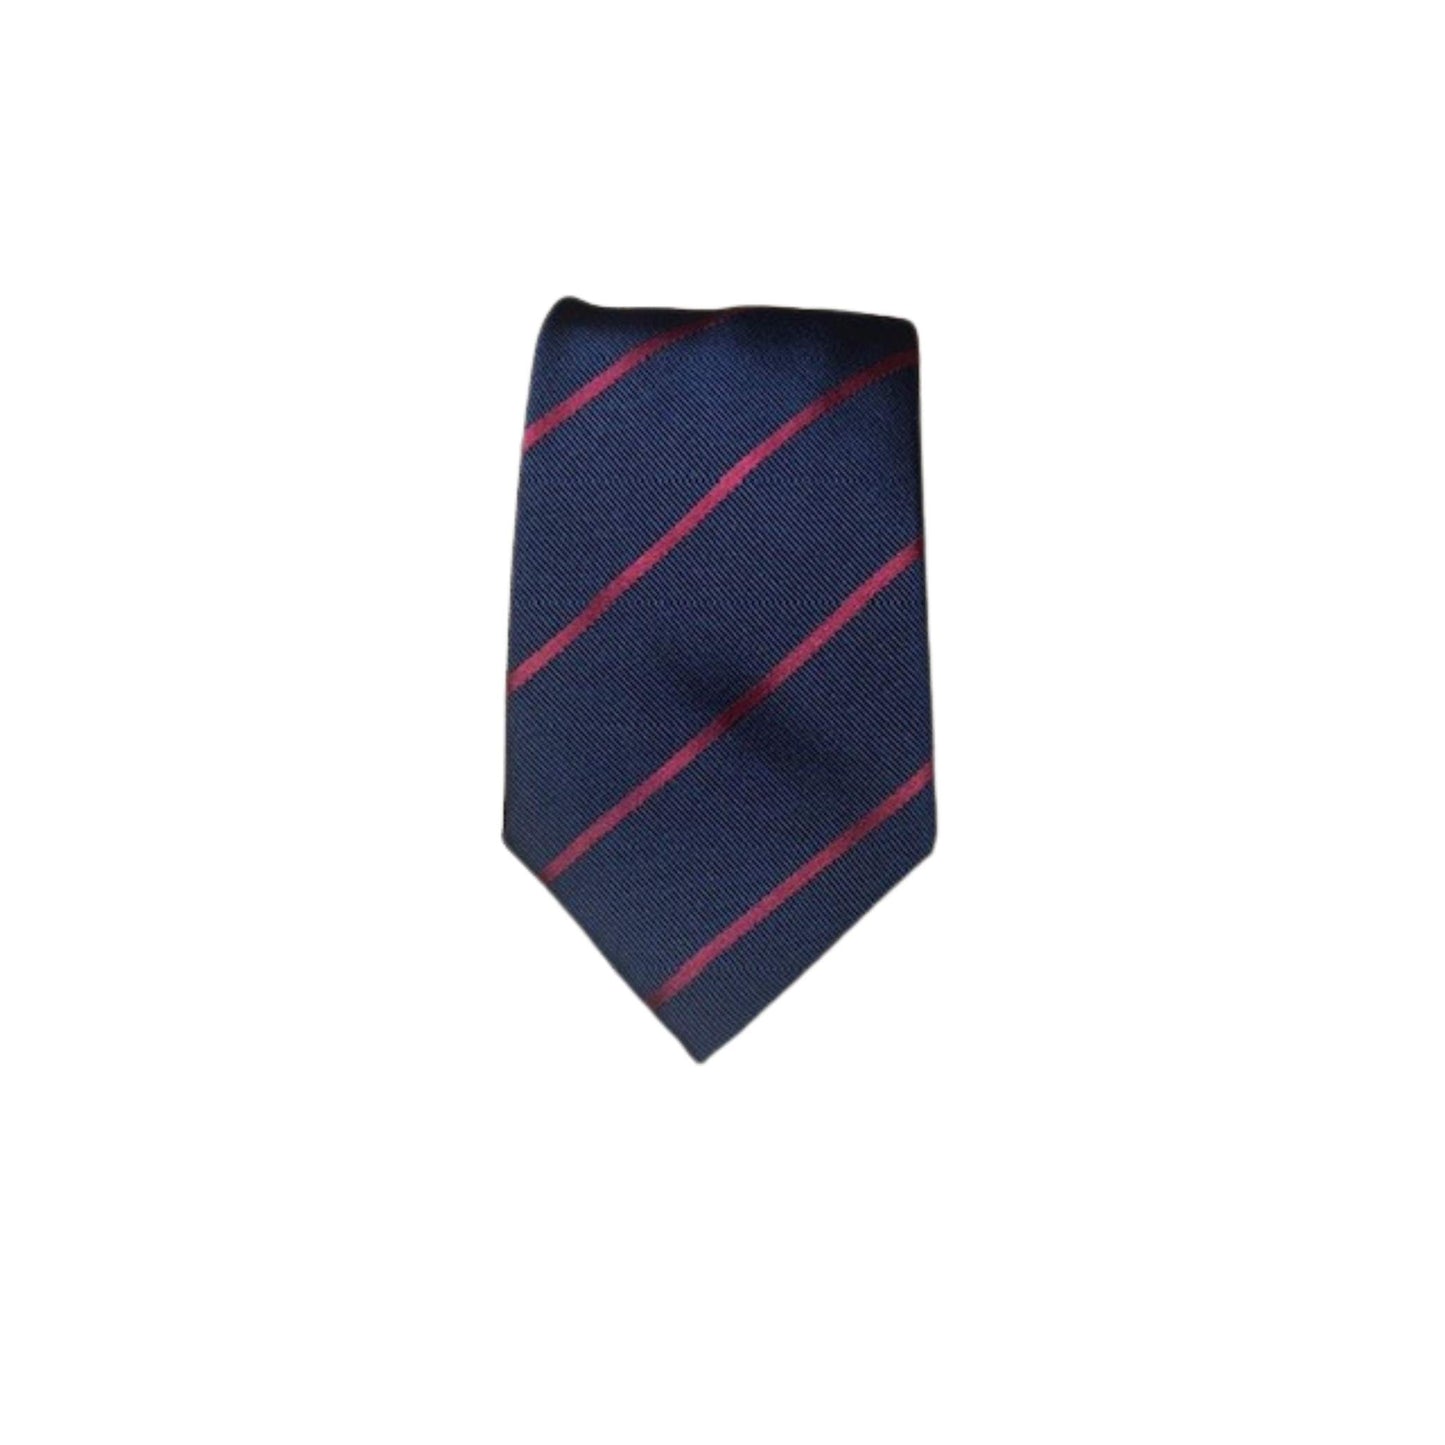 Rhodes Wood  Navy and light Red stripe tie